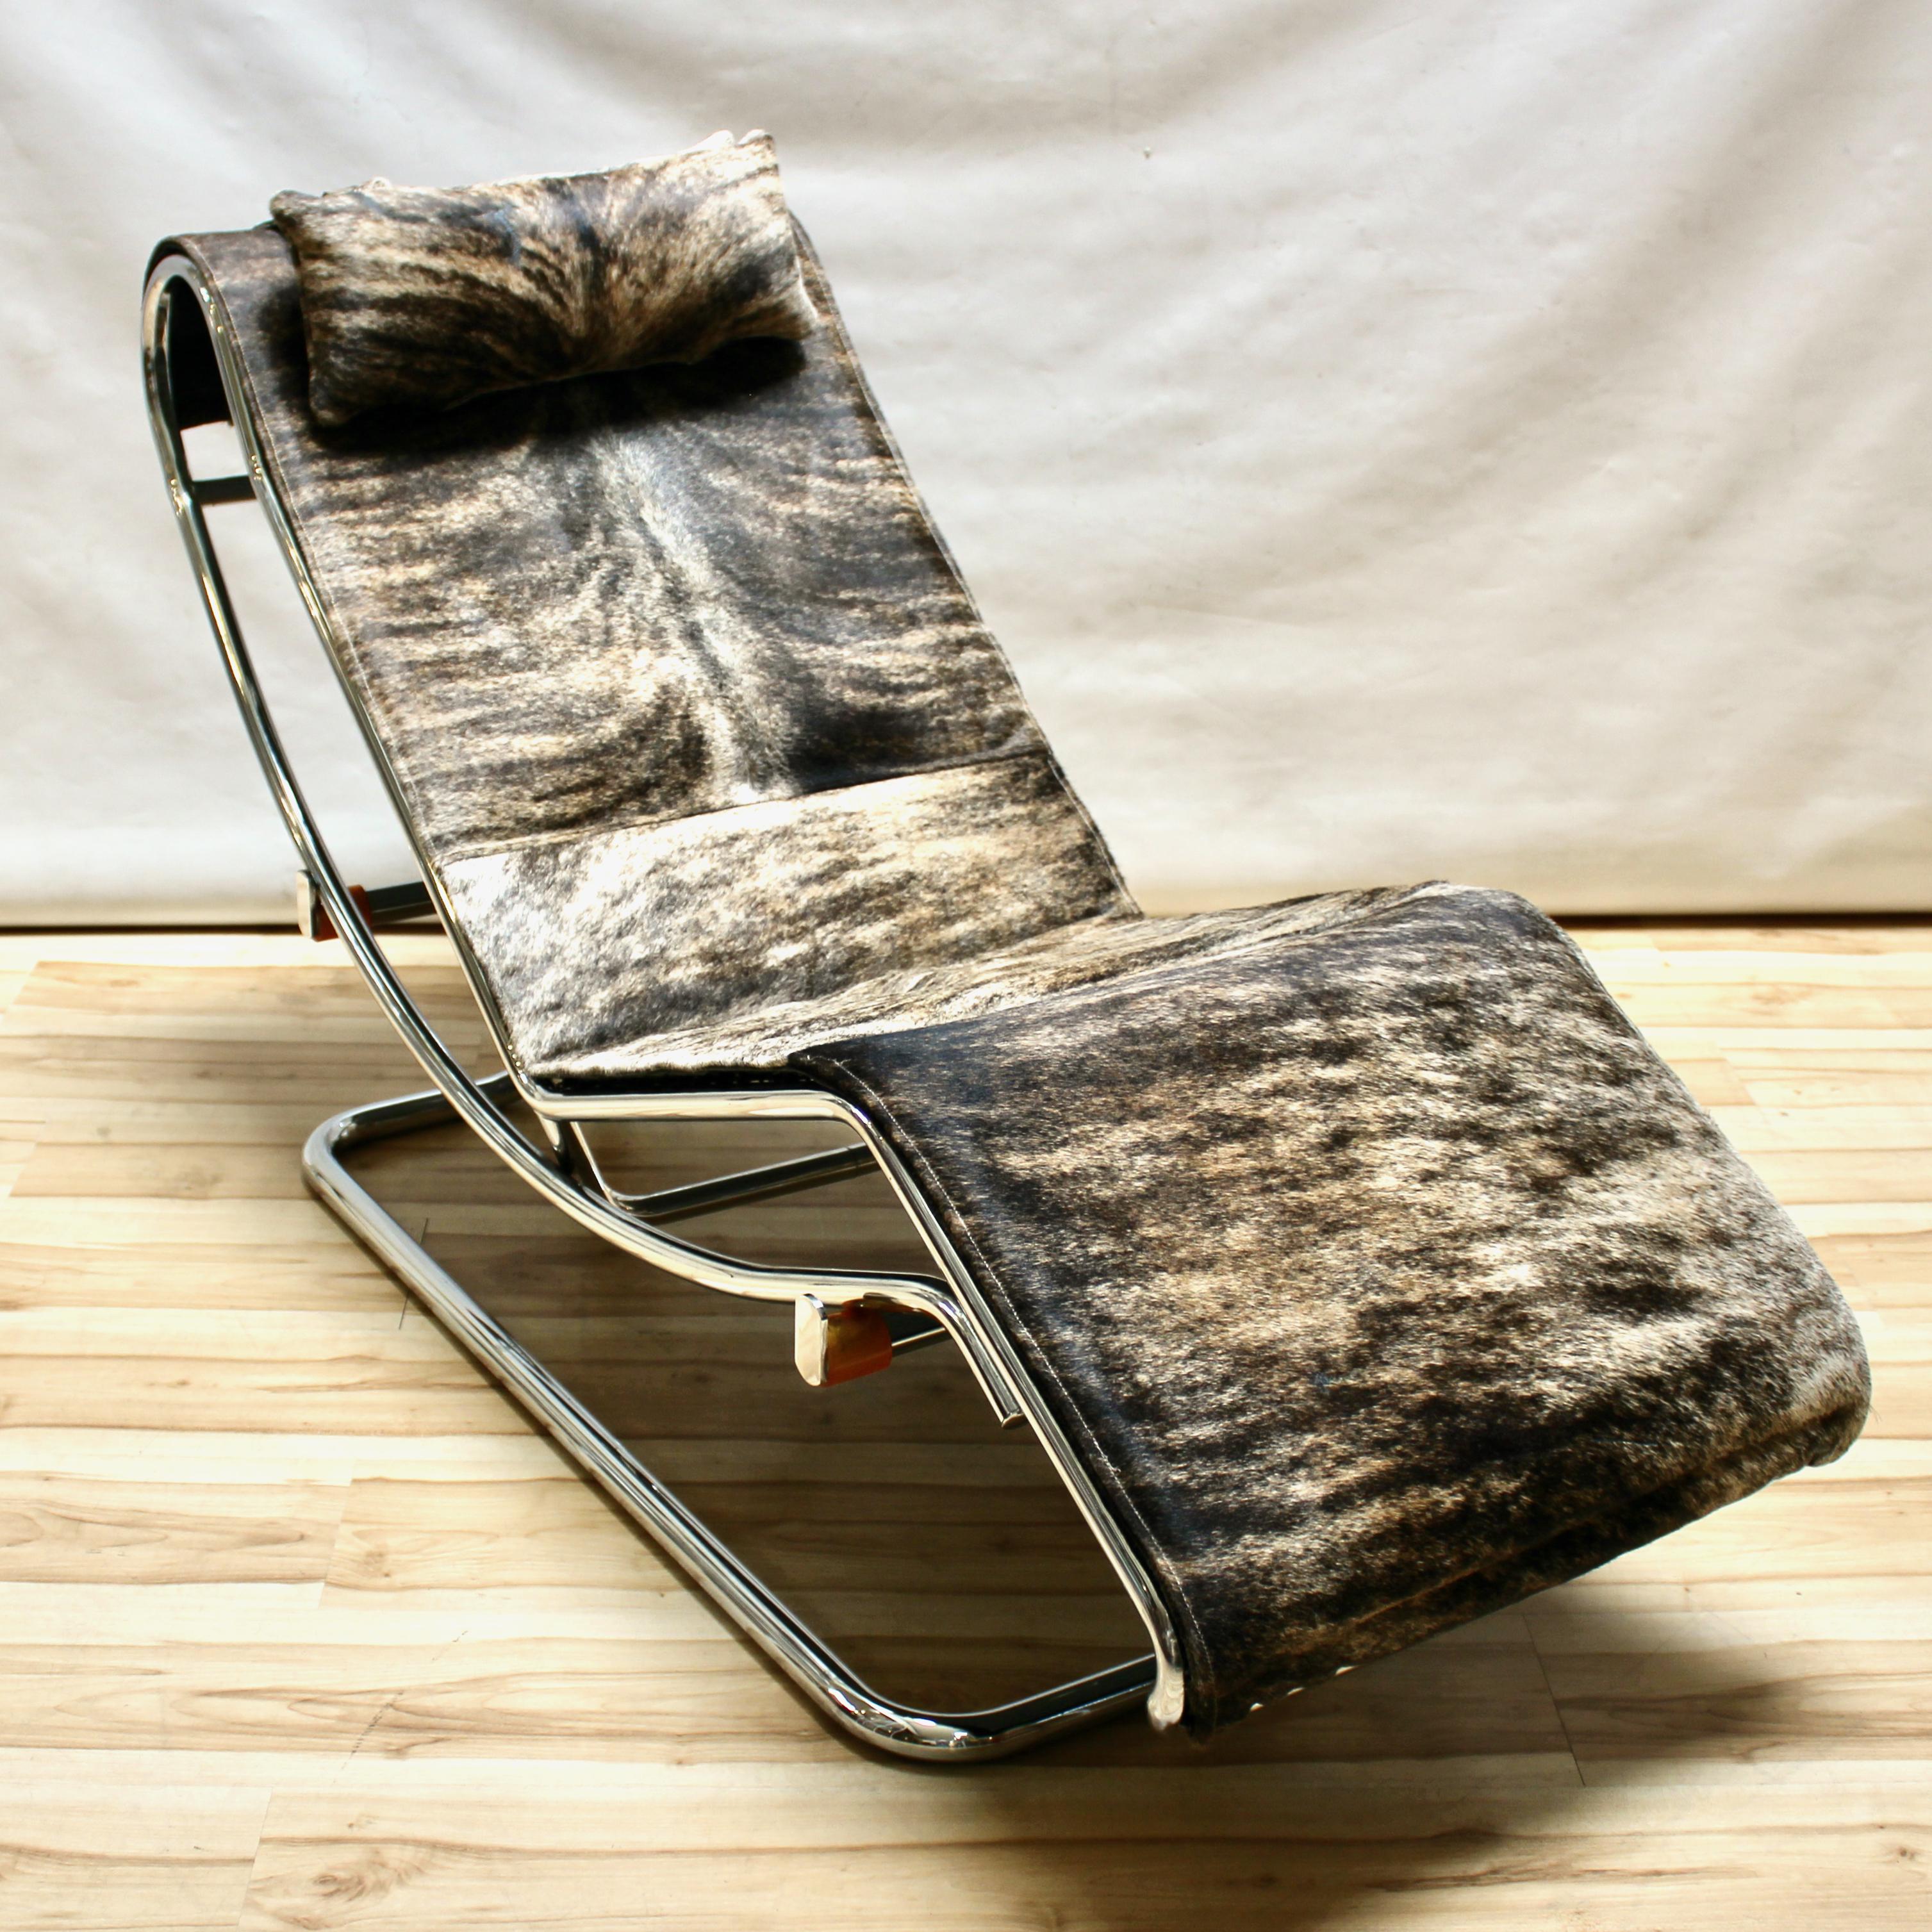 Vintage 1960s lounge chair in the style of Le Corbusier’s LC4 chair. The chair has been upholstered in cowhide and is fully adjustable. Both the seat and base are chrome, and there is an adjustable upholstered pillow. In excellent